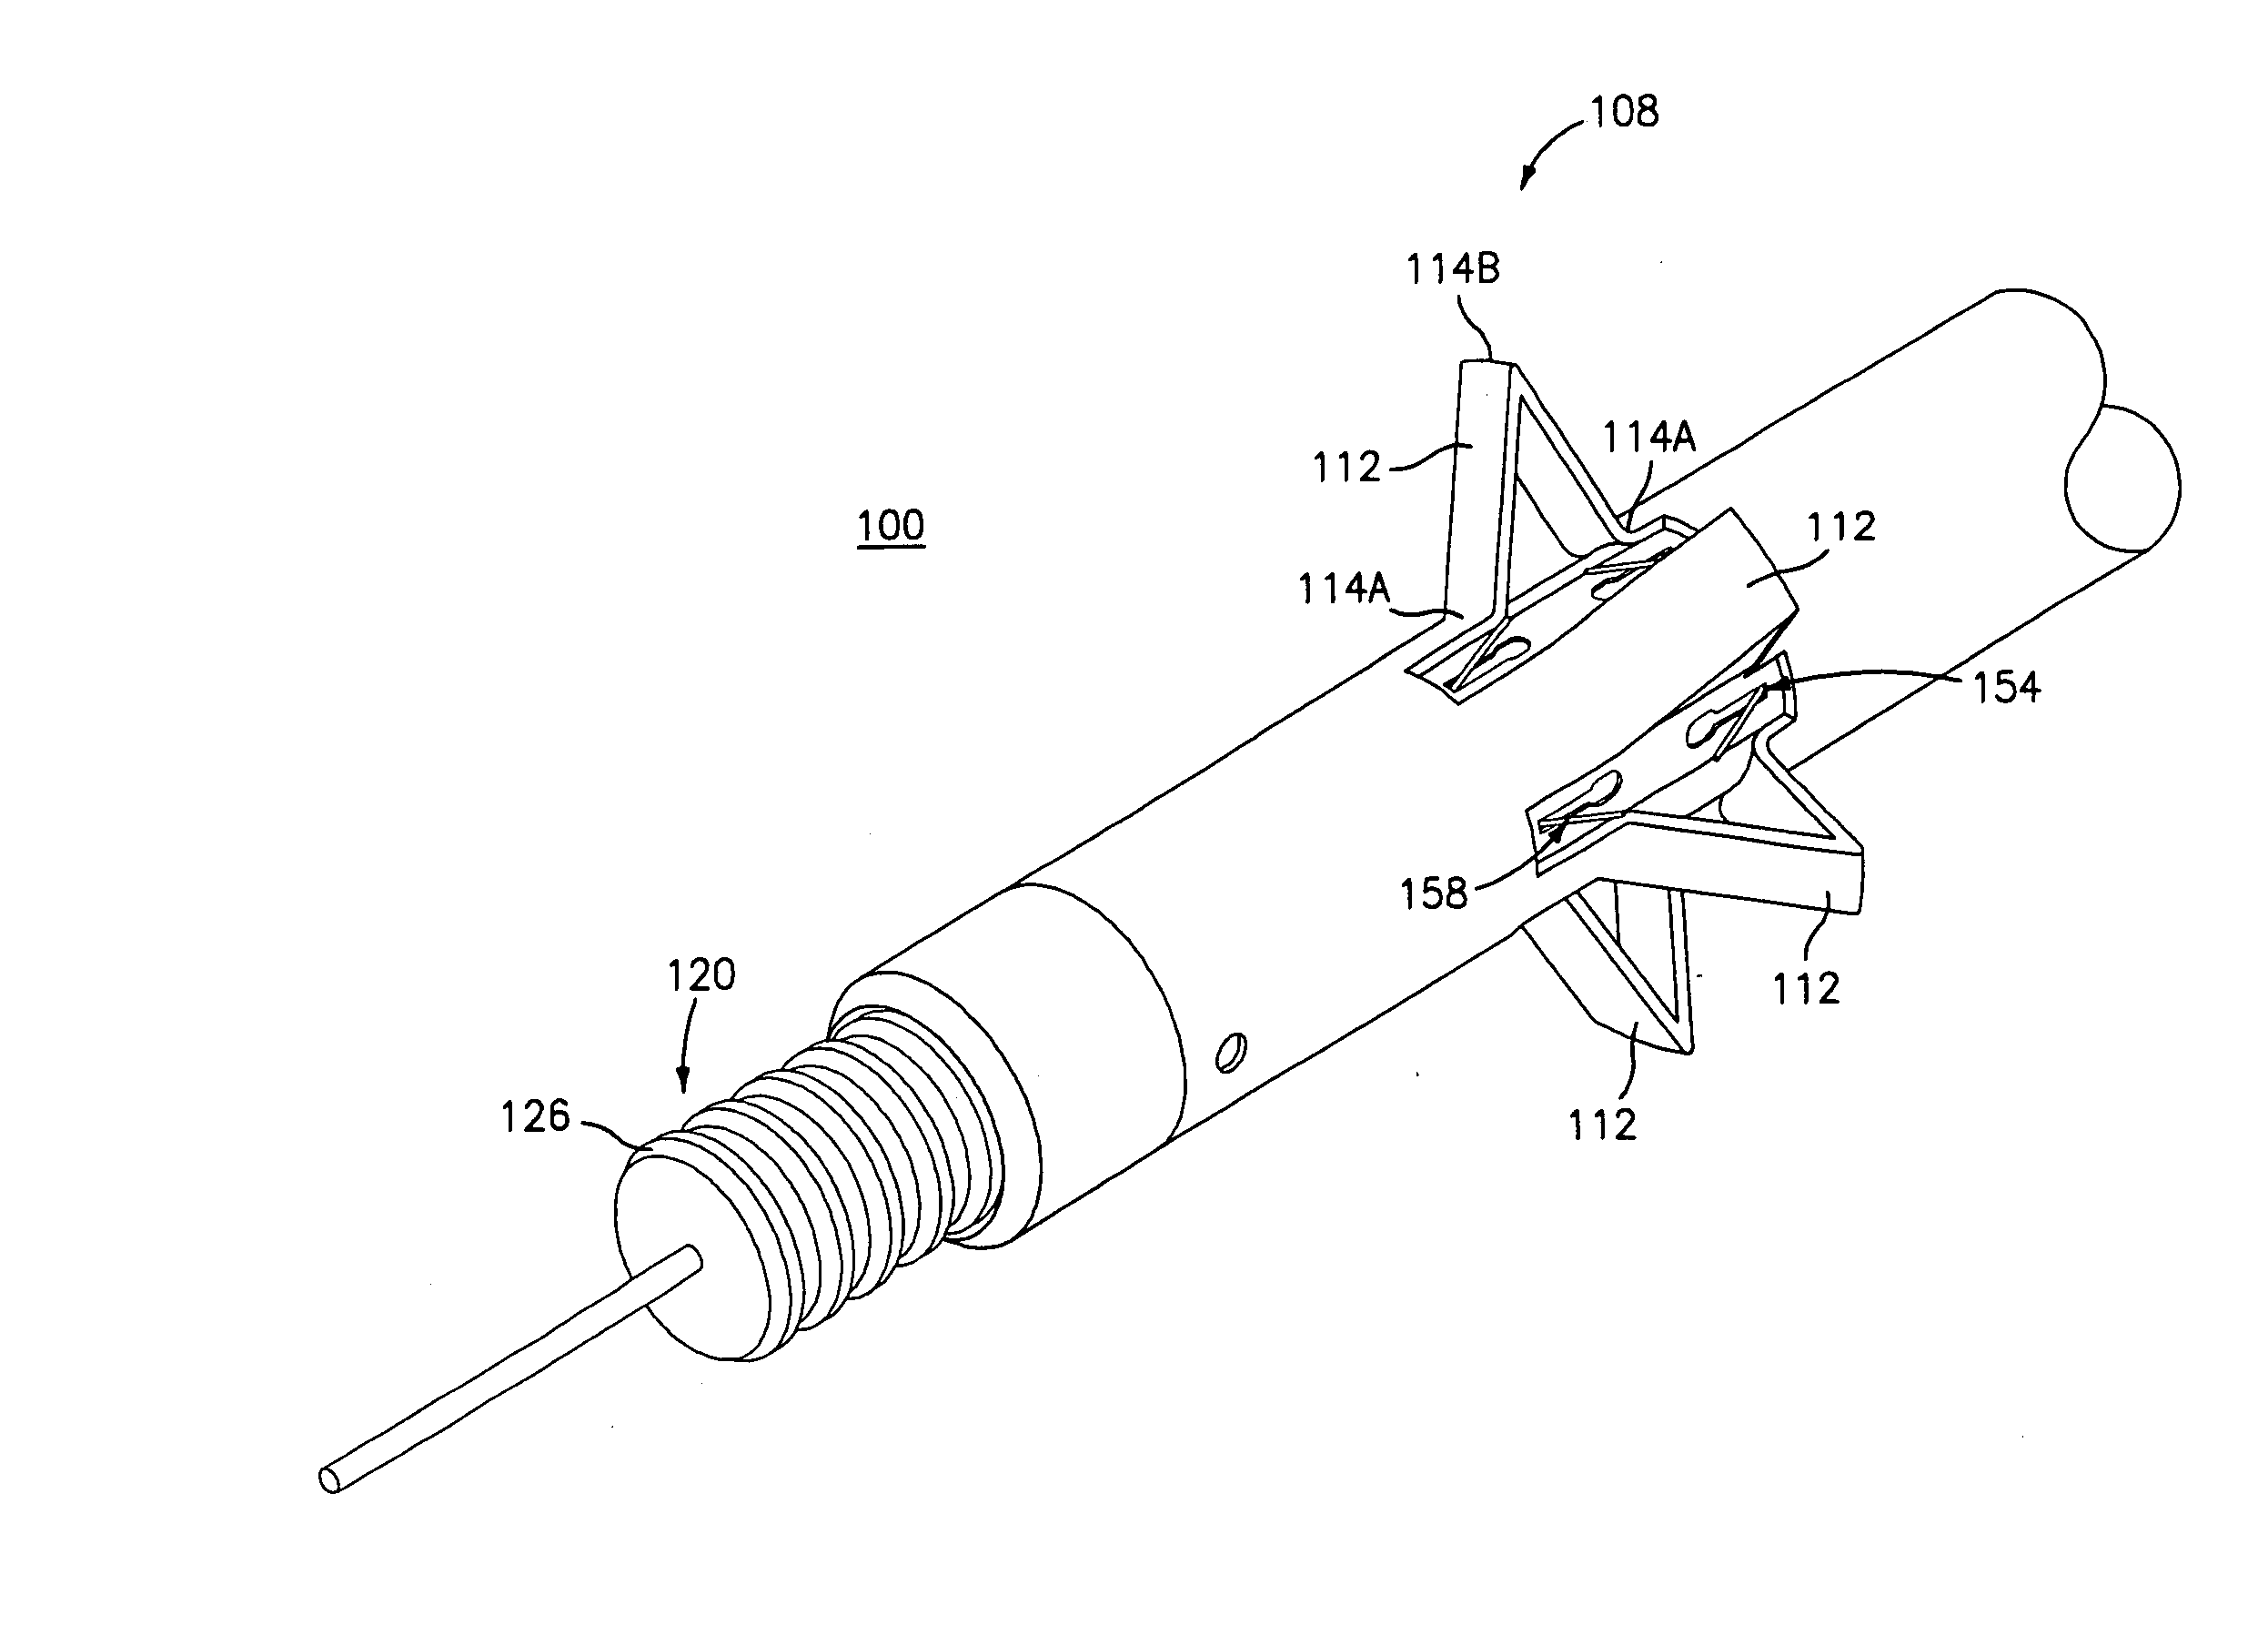 Method and appartus for anastomosis including an anchoring sleeve